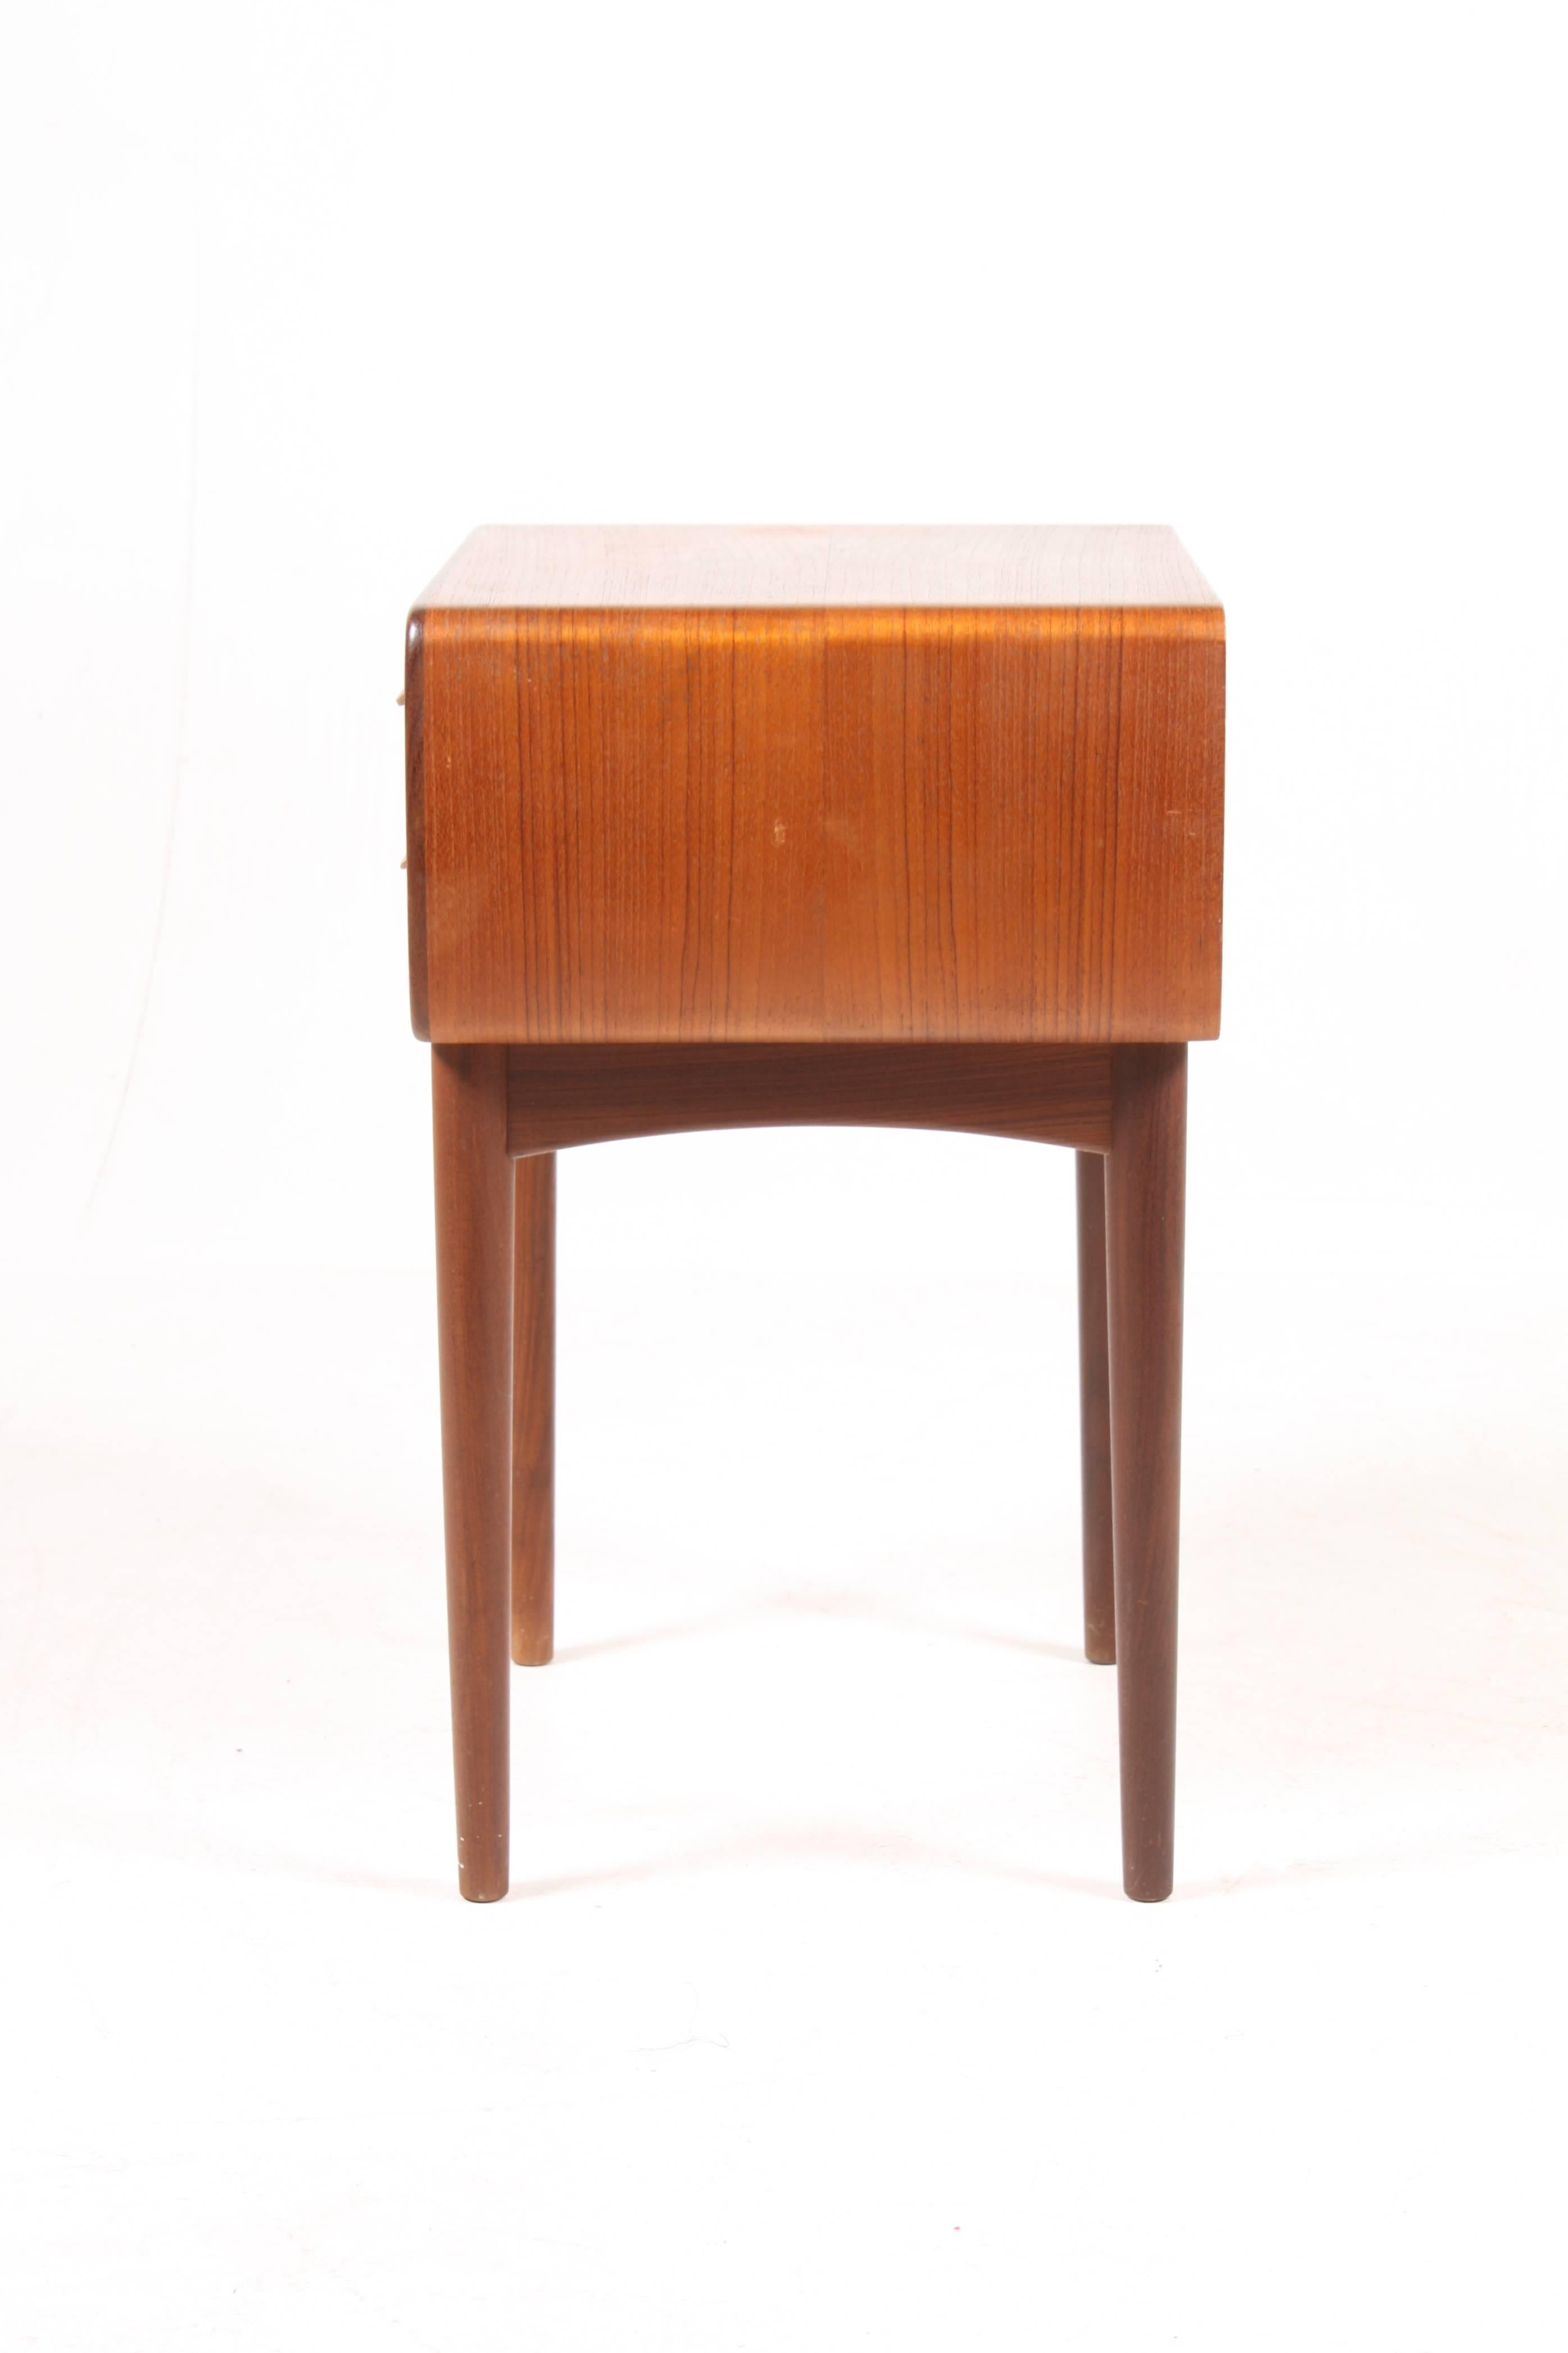 Pair of nightstands in teak, designed by Maa. Johannes Andersen and made by CFC furniture, Denmark in the 1960s. Great original condition.